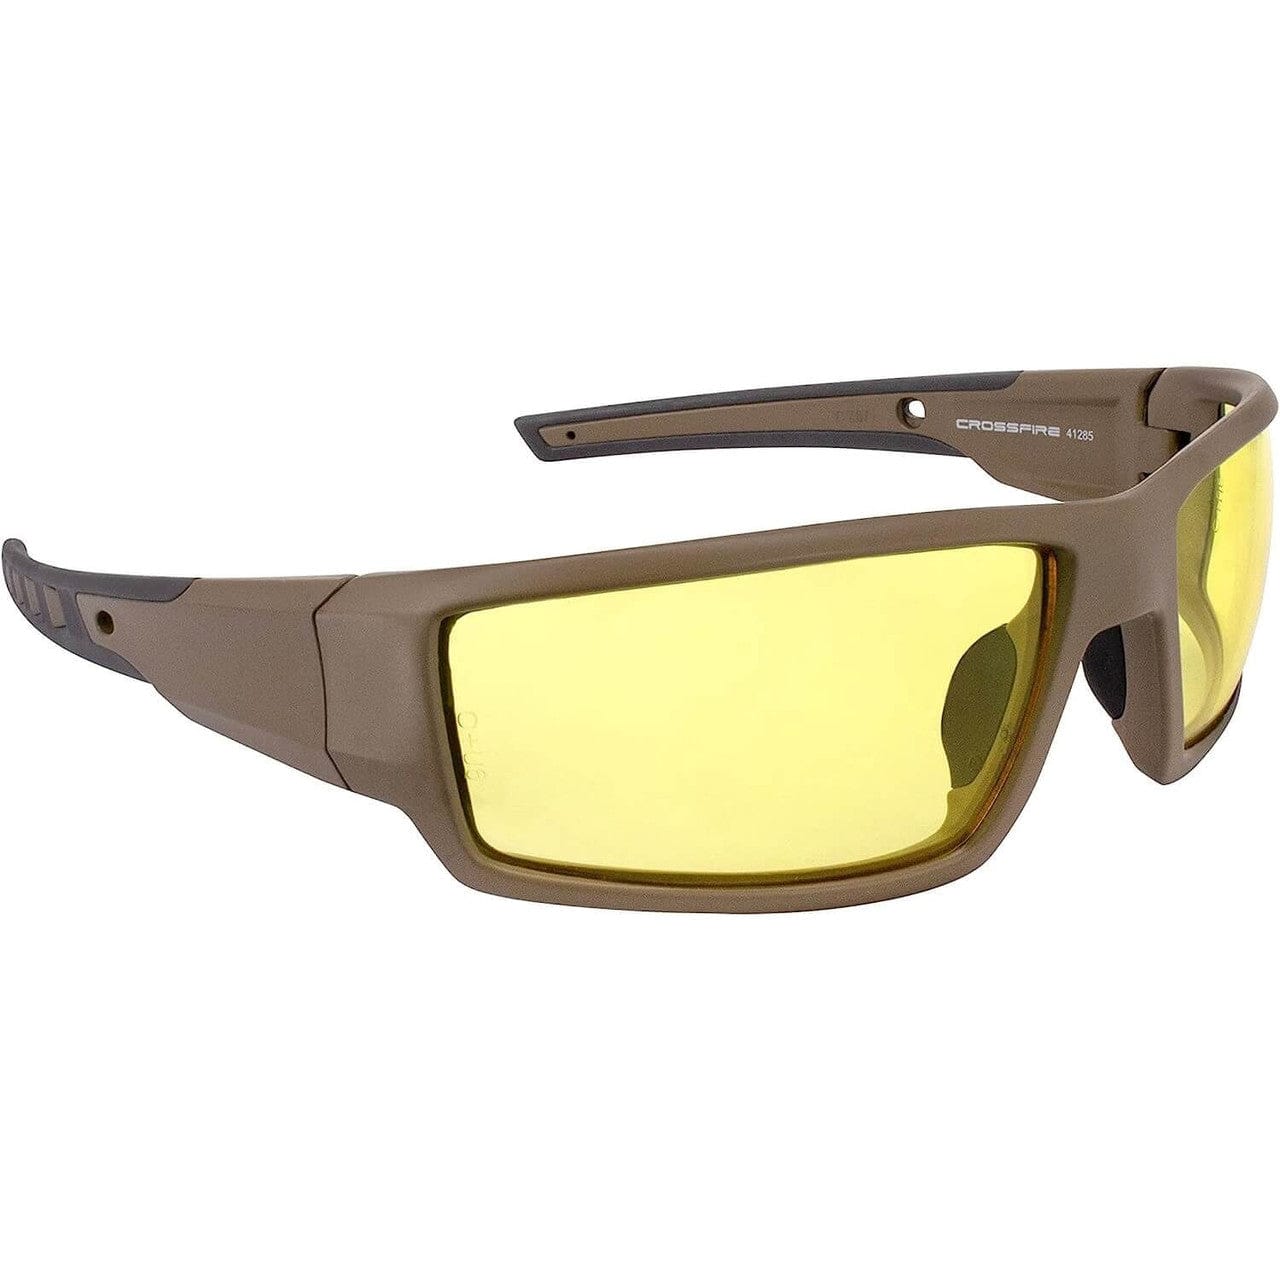 Crossfire 41285 Cumulus Safety Glasses - Tan Frame - Yellow Lens